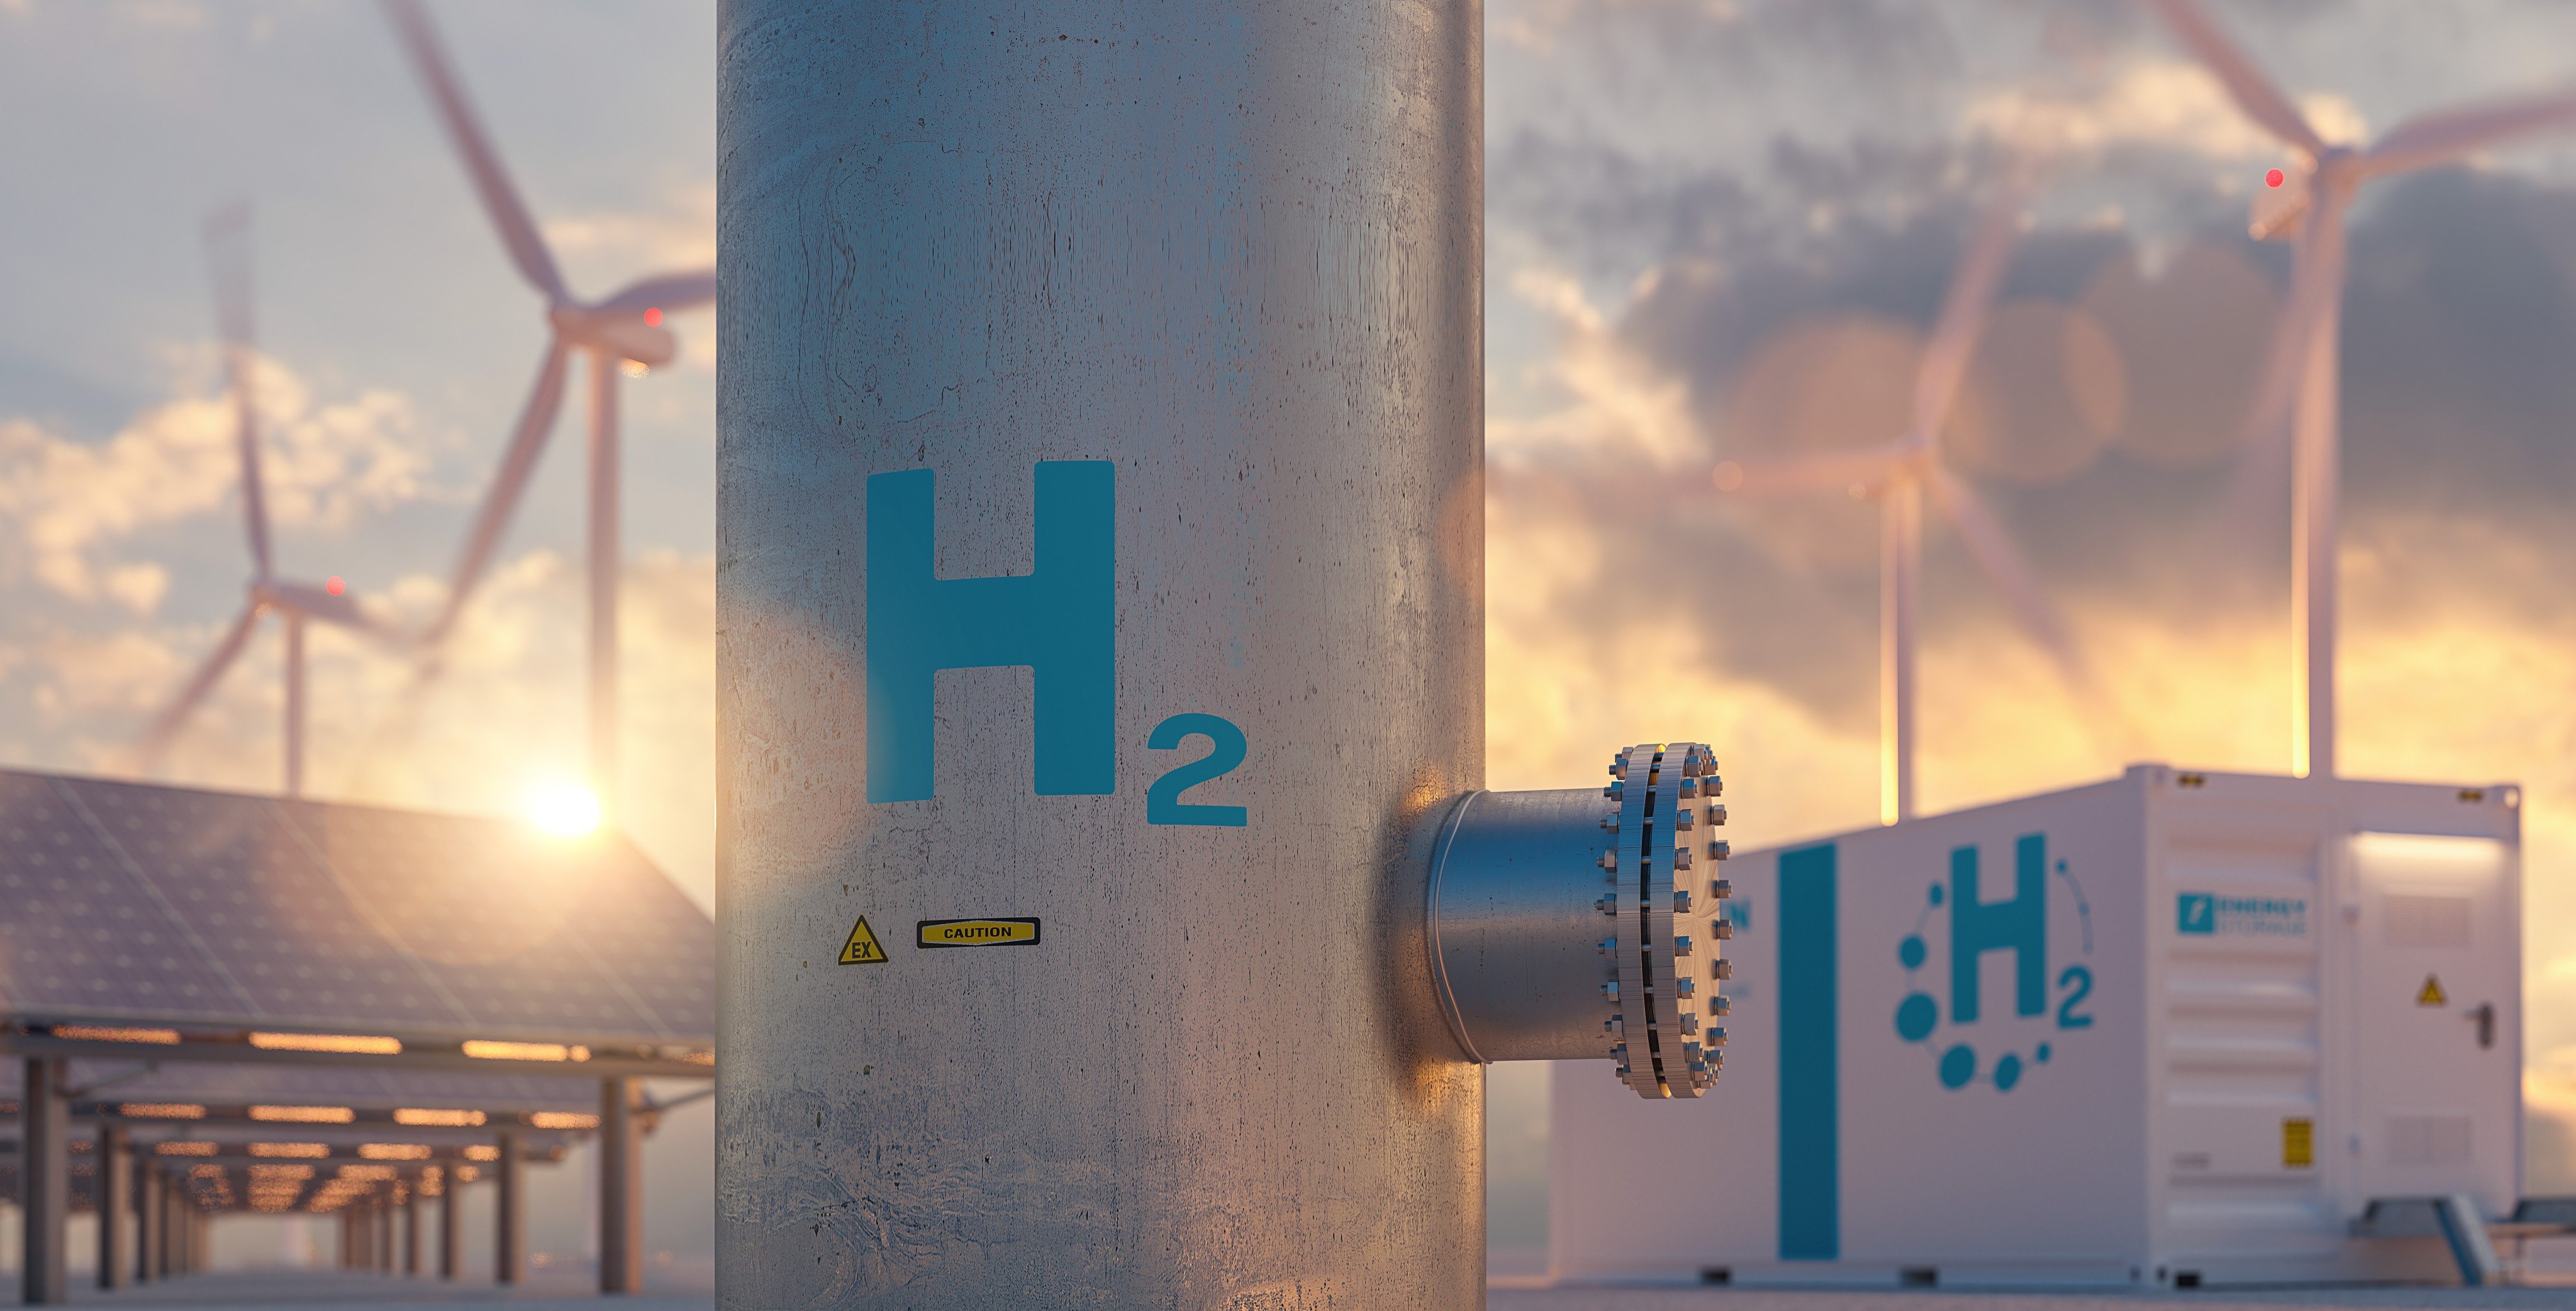 China has more than 30 large-scale green hydrogen projects involving 260 billion yuan of investment. Photo: Shutterstock